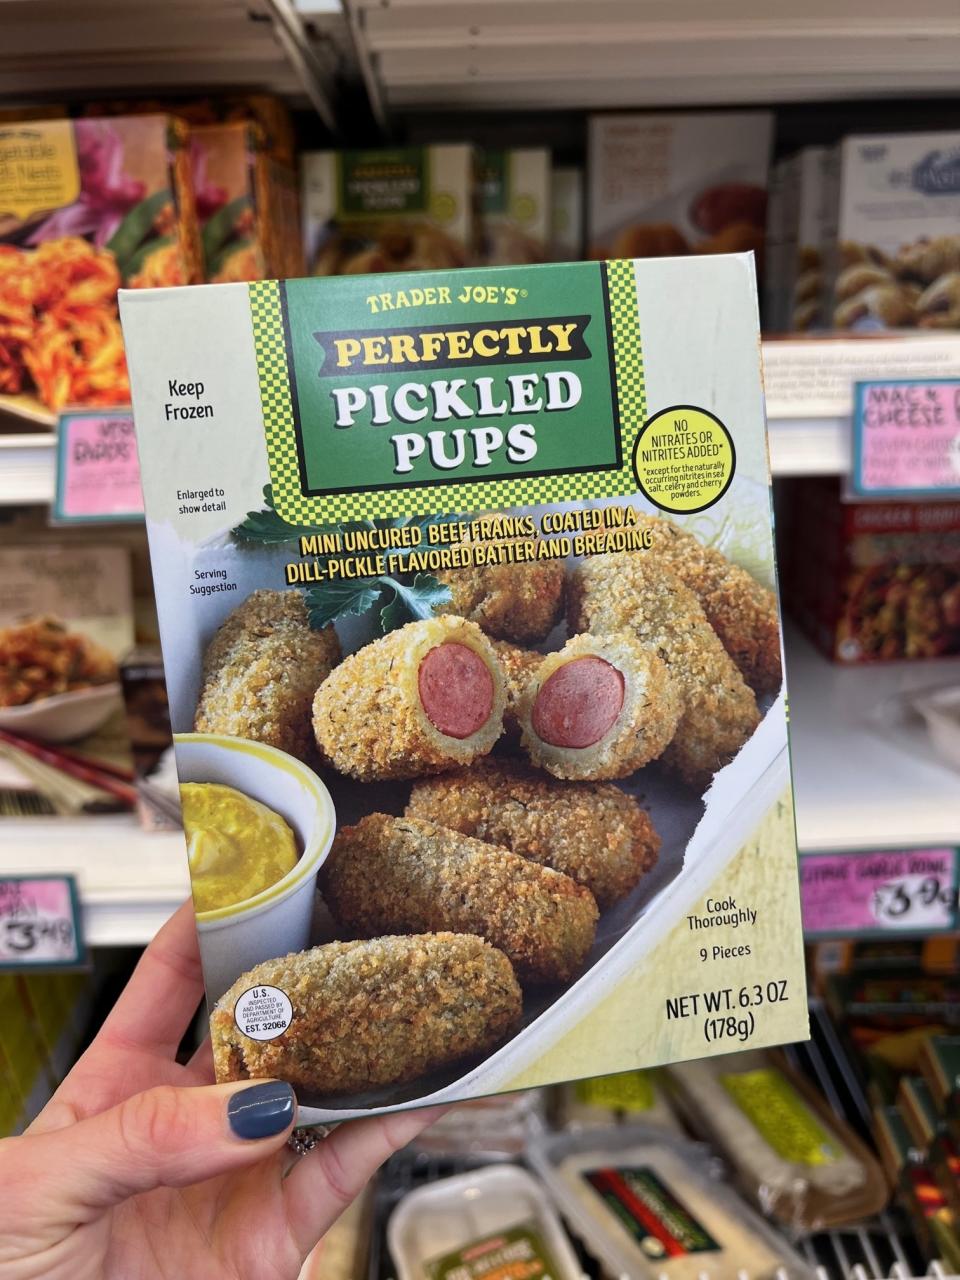 A box of Perfectly Pickled Pups: "mini uncured beef franks, coated in a dill-pickle flavored batter and breading"